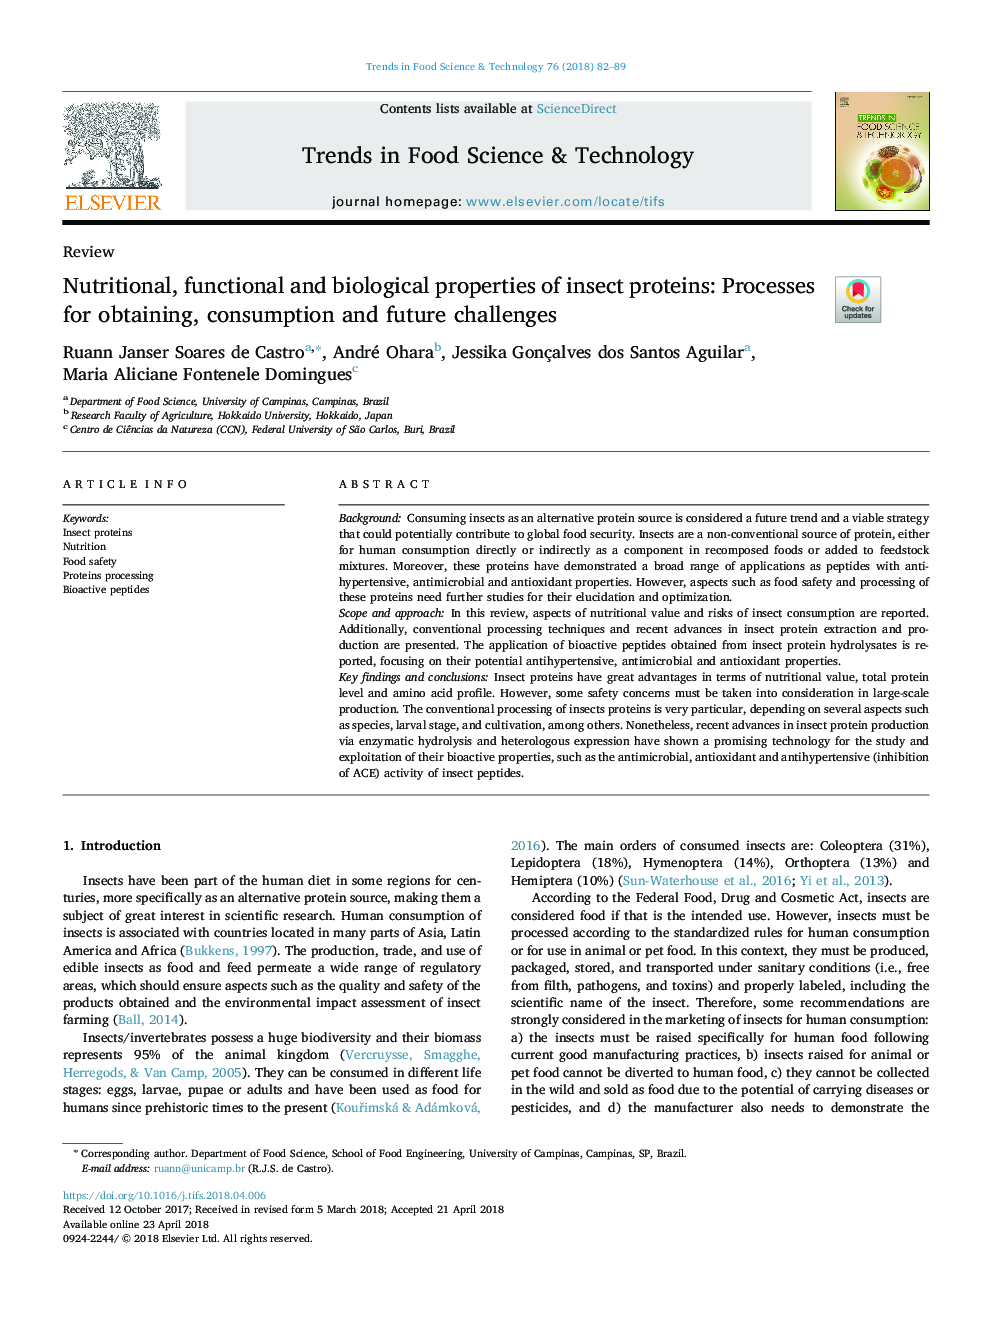 Nutritional, functional and biological properties of insect proteins: Processes for obtaining, consumption and future challenges